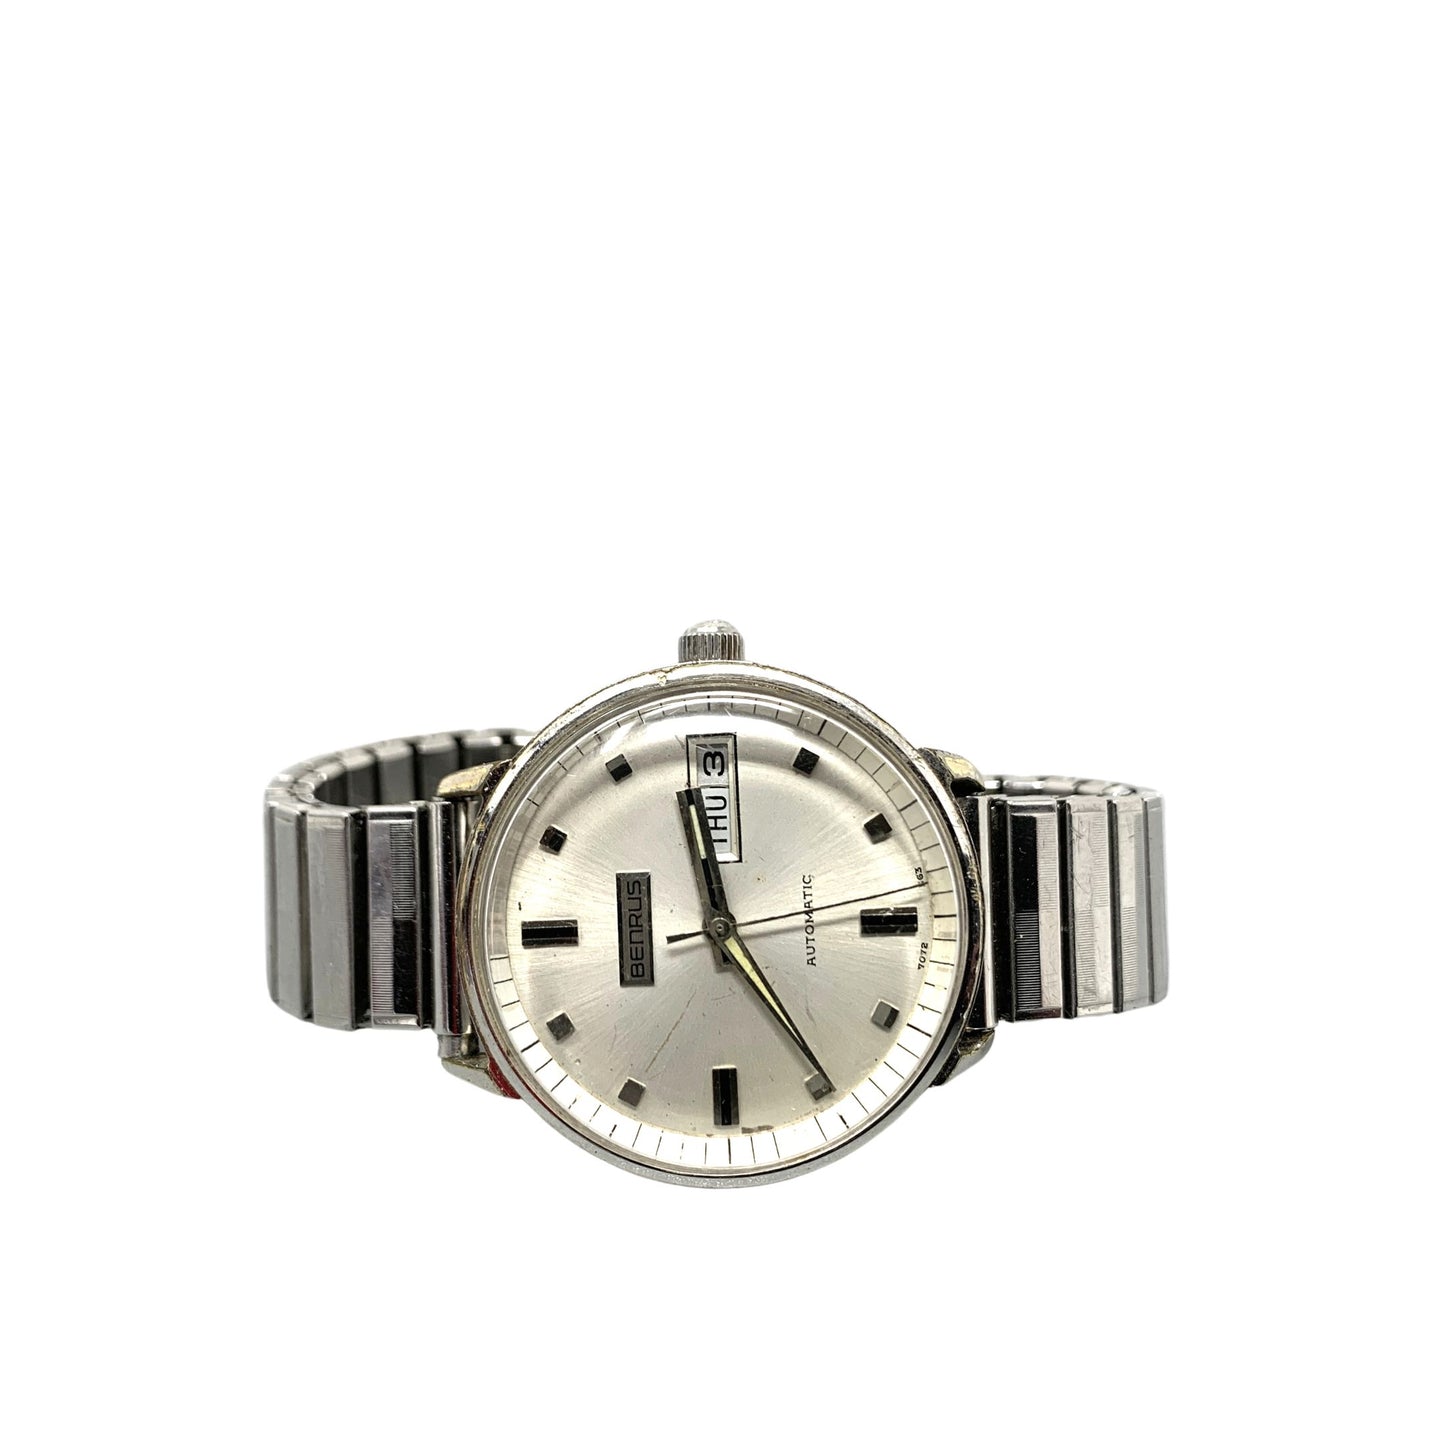 Benrus 1970's Stainless 7072-563 Automatic Day/ Date Watch